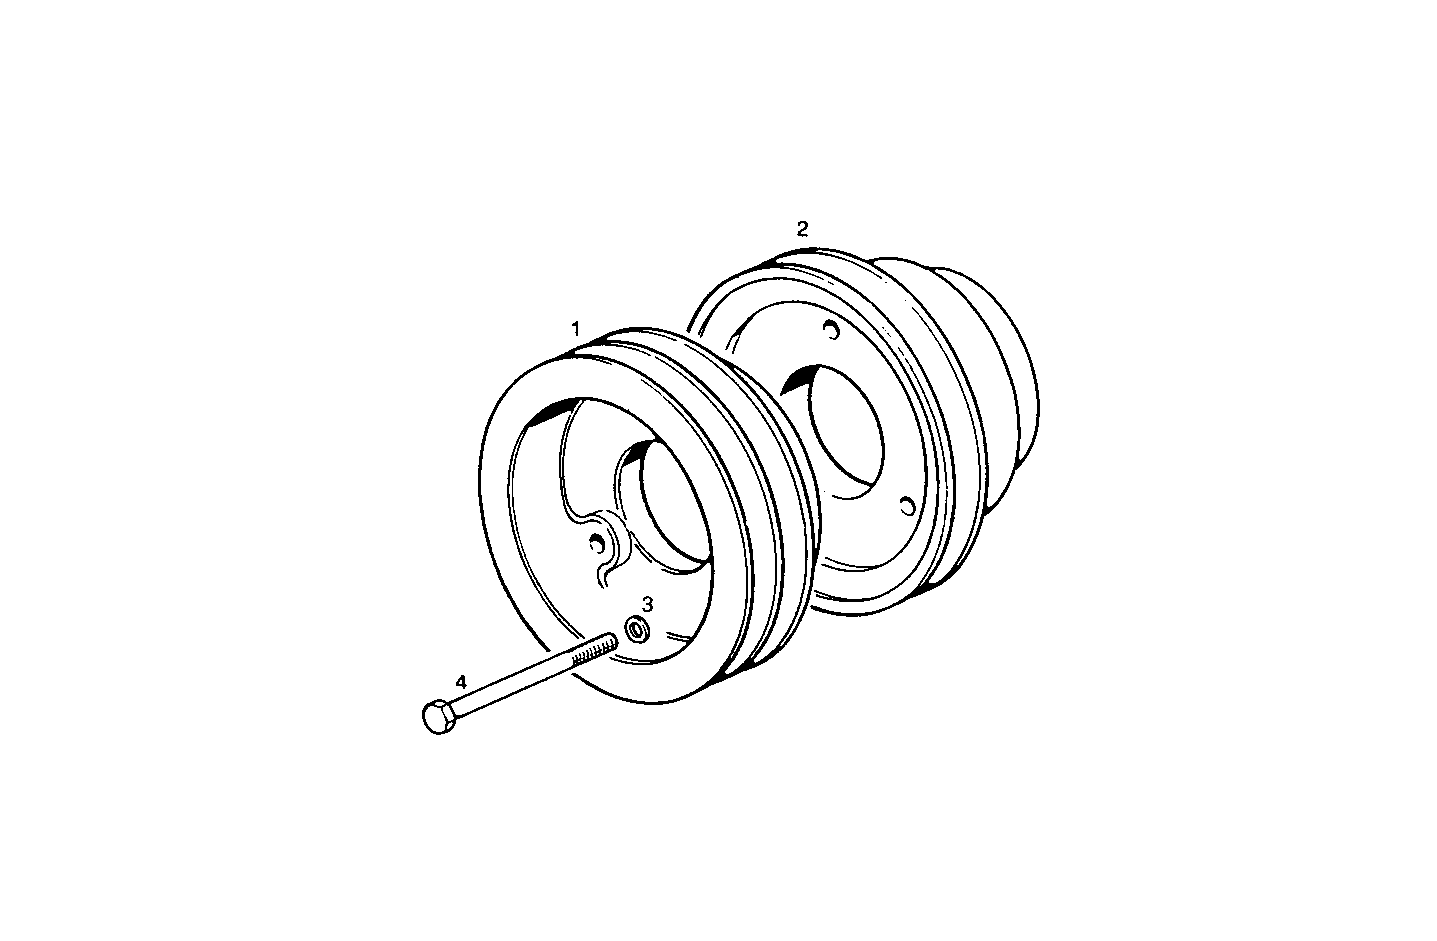 Iveco/FPT PULLEY ON ENGINE AXIS